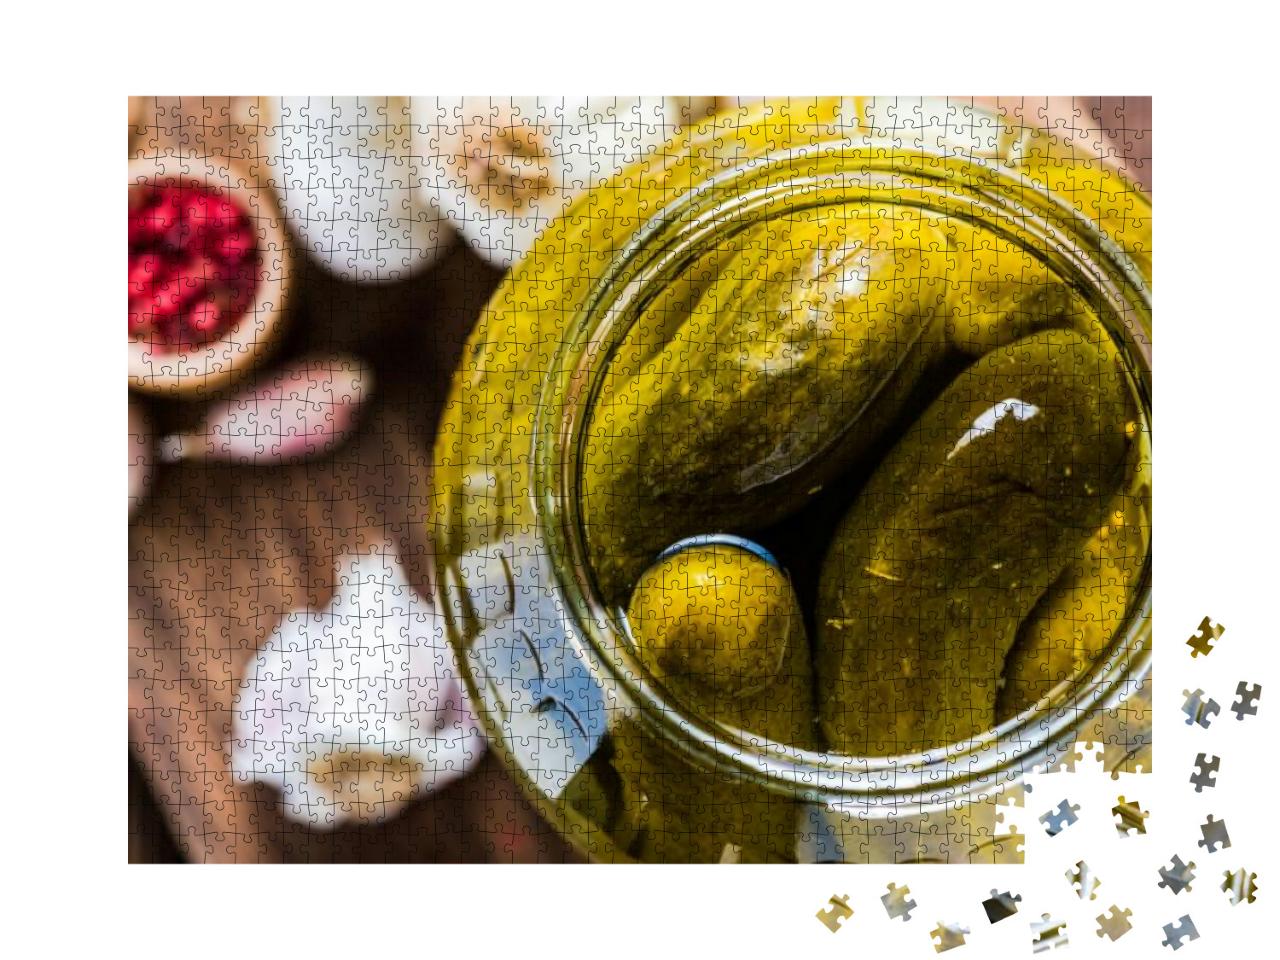 Pickled Gherkins in Jar, Fermented Food with Spice... Jigsaw Puzzle with 1000 pieces